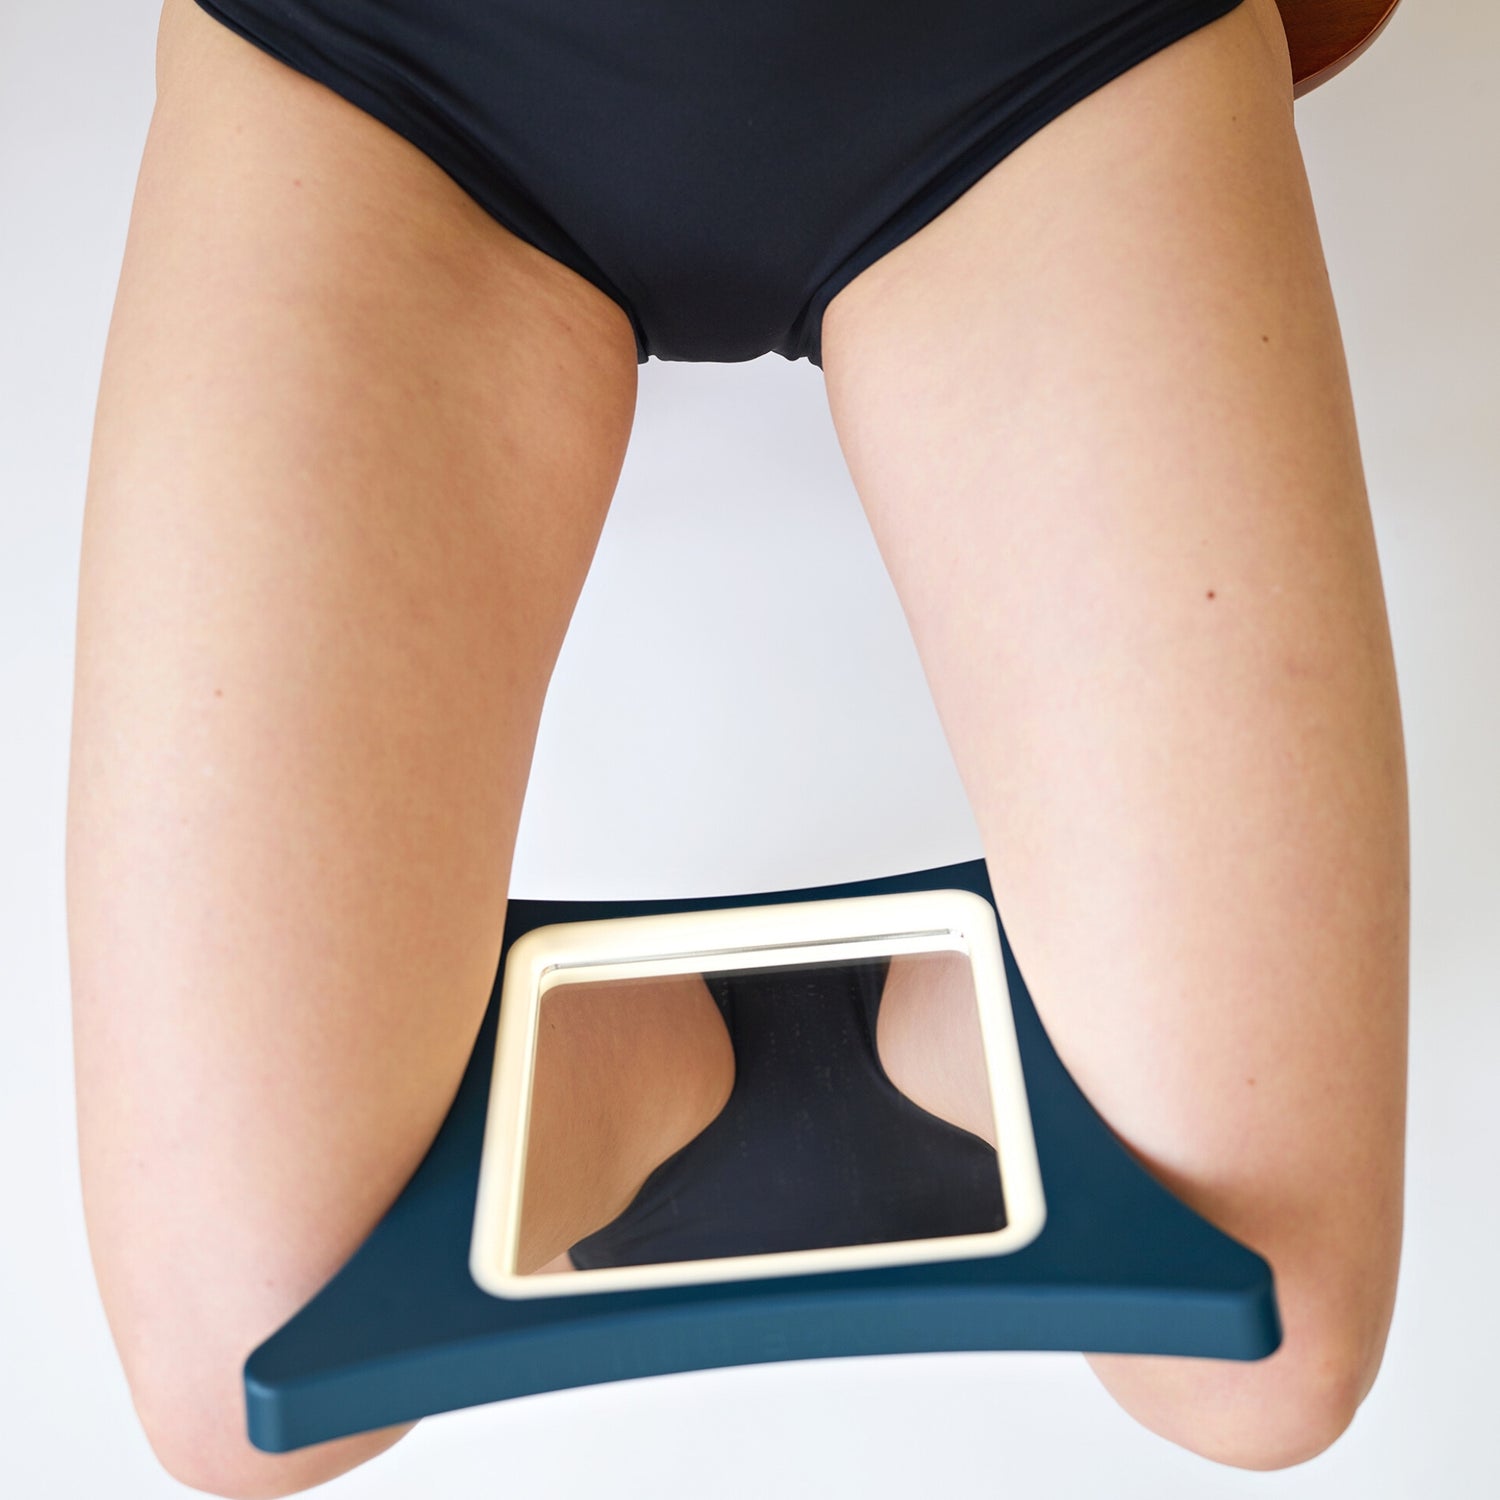 Image of woman using VieVision Between Legs Mirror